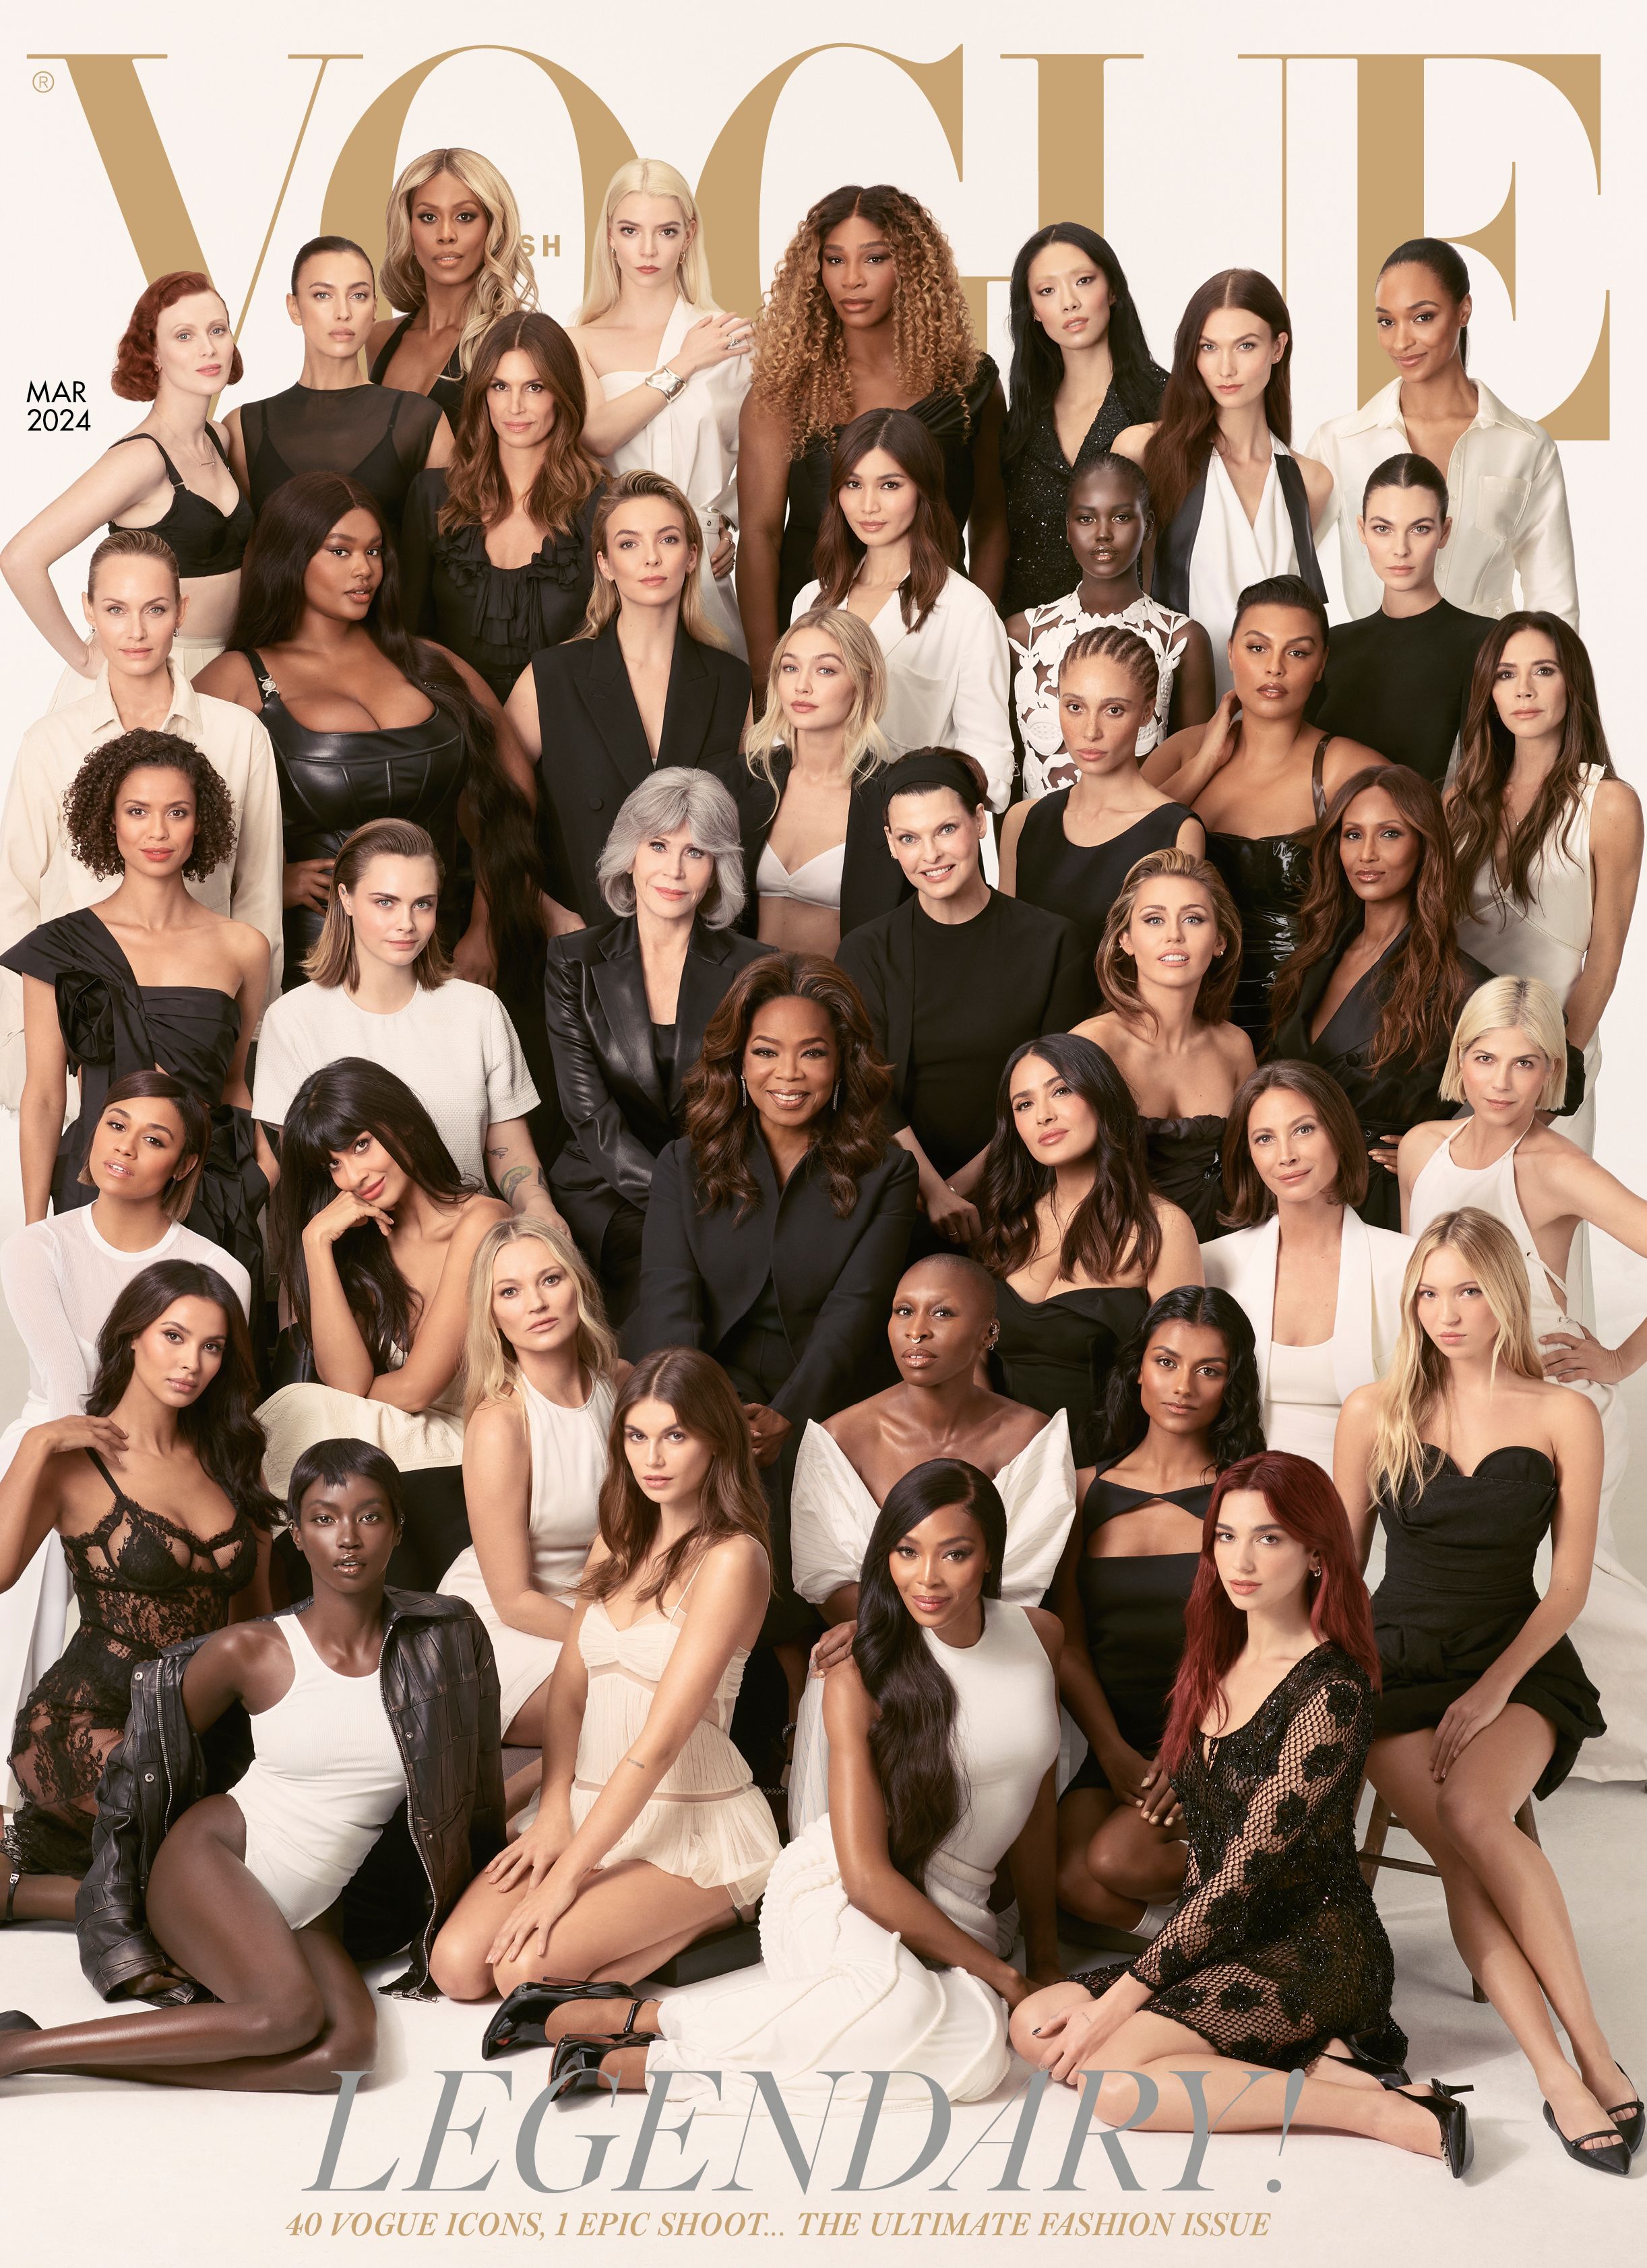 British Vogue features 40 'legendary' cover stars for editor Edward  Enninful's final issue | CNN